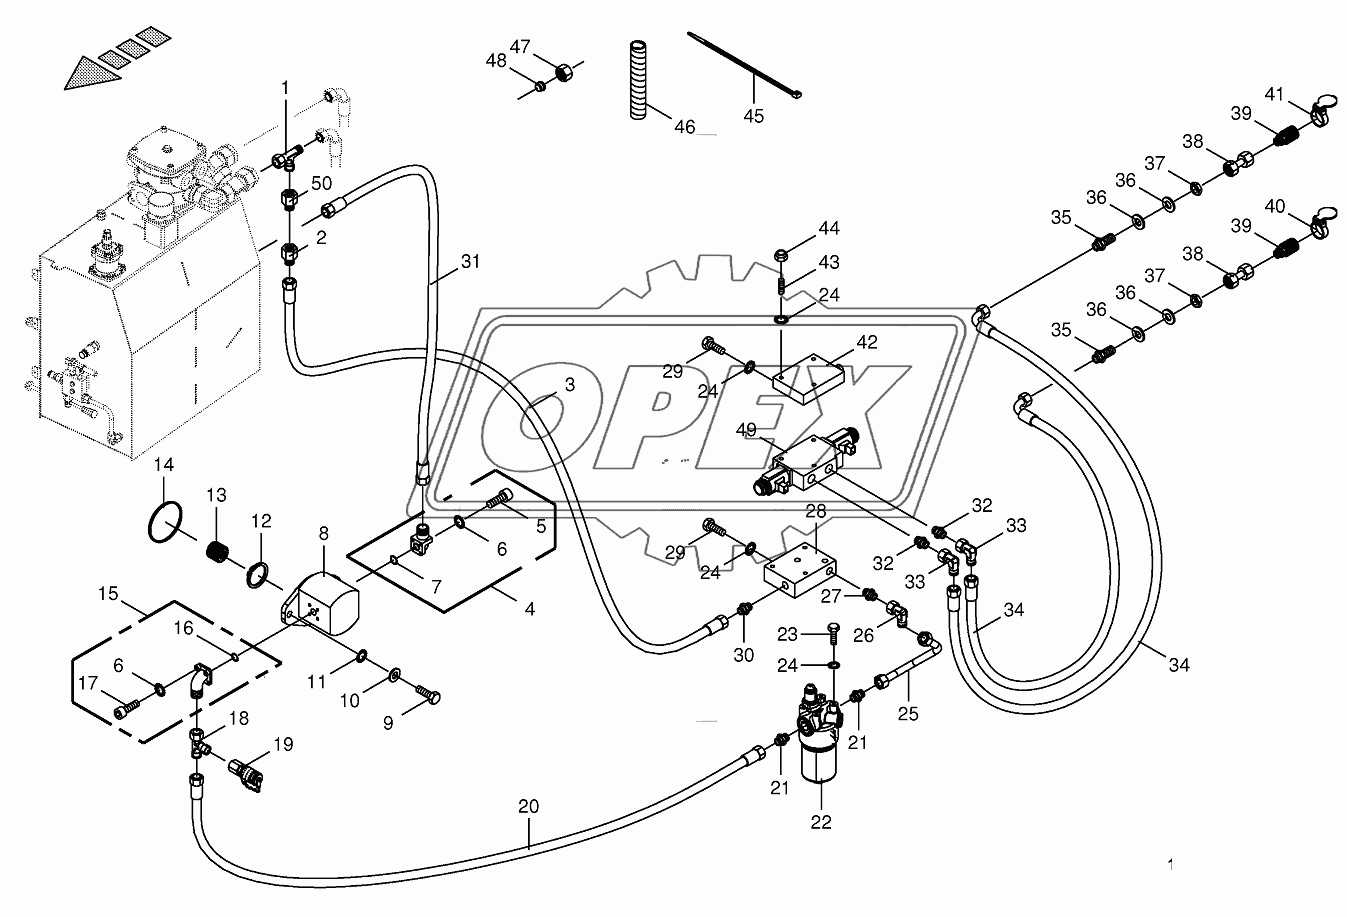 Hydraulics-additive connection back 833001 108.0